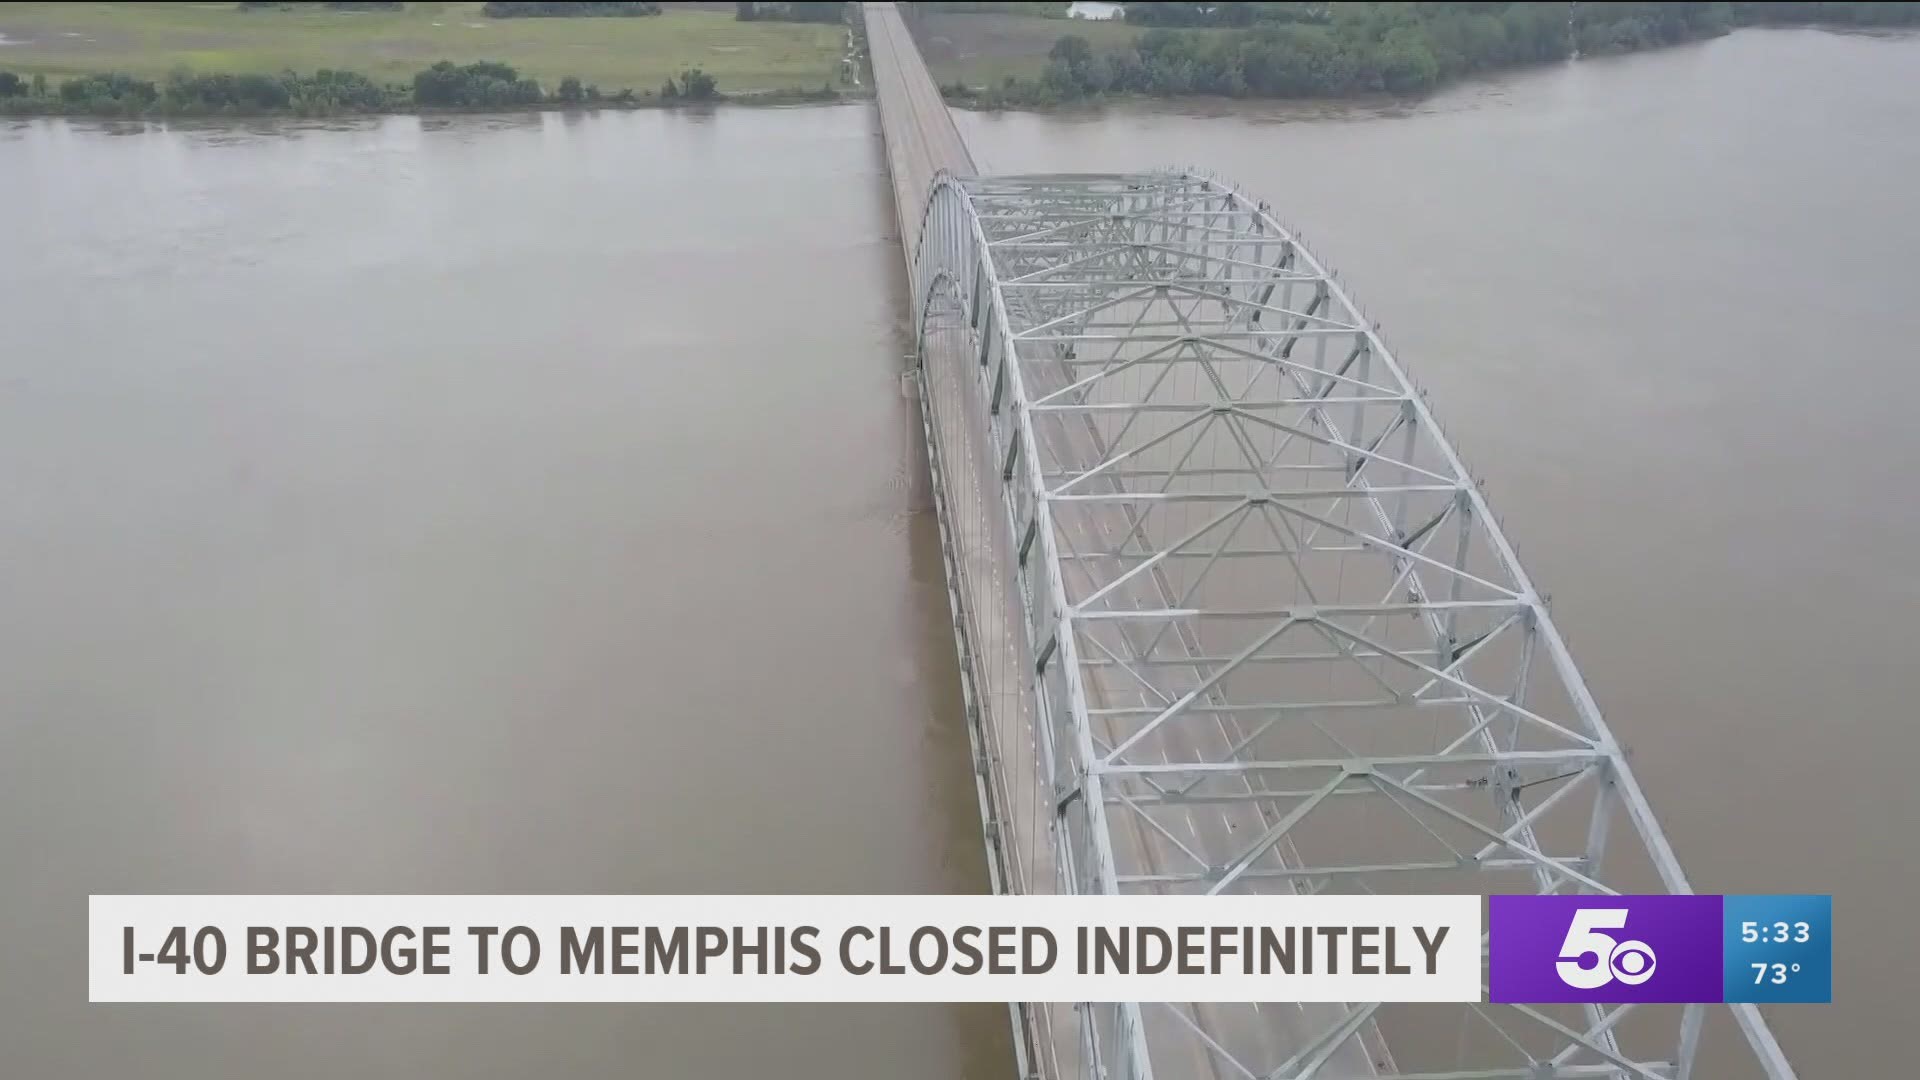 U.S. Rep. Rick Crawford, R-Jonesboro, said in a Sunday (May 16) interview the I-40 Memphis bridge situation is a “national concern.”